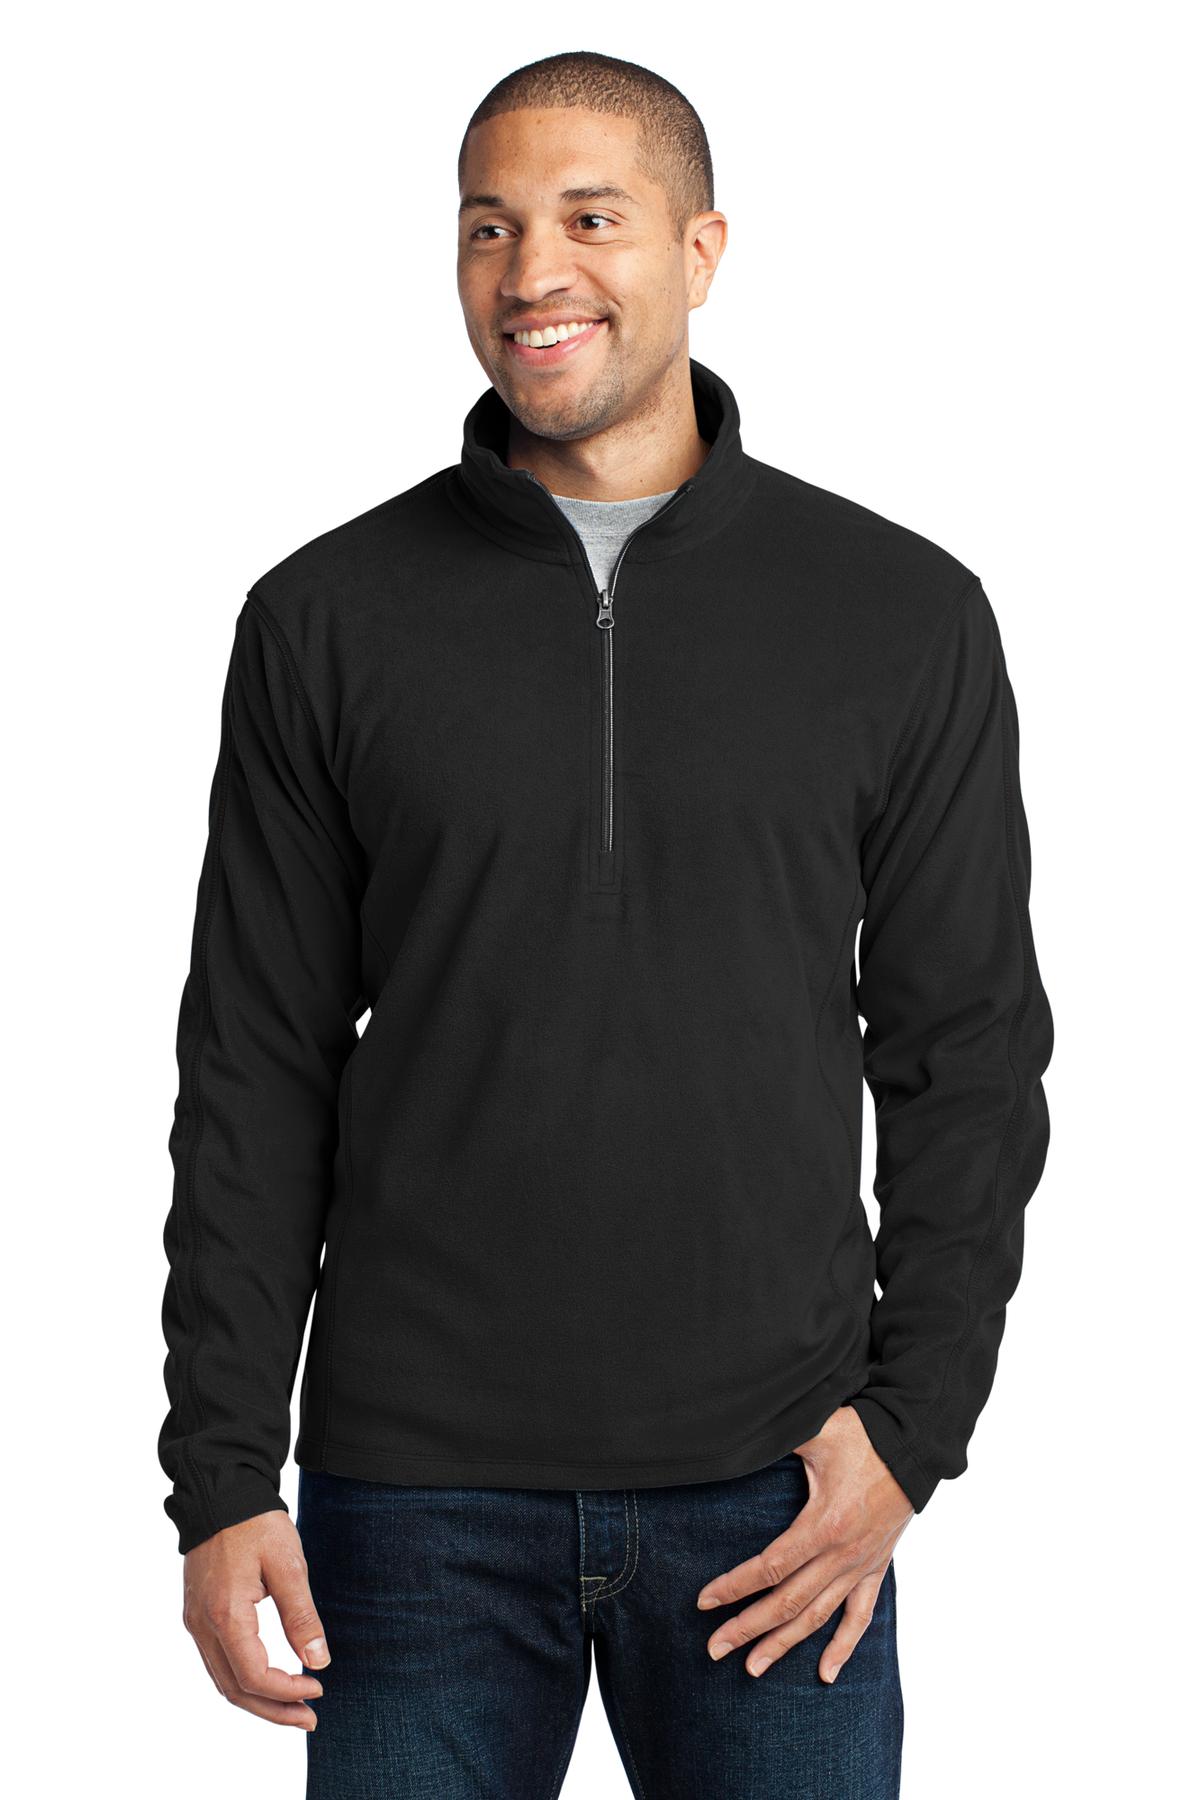 Port Authority Outerwear, Sweat shirts & Fleece for Hospitality ® Microfleece 1/2-Zip Pullover.-Port Authority